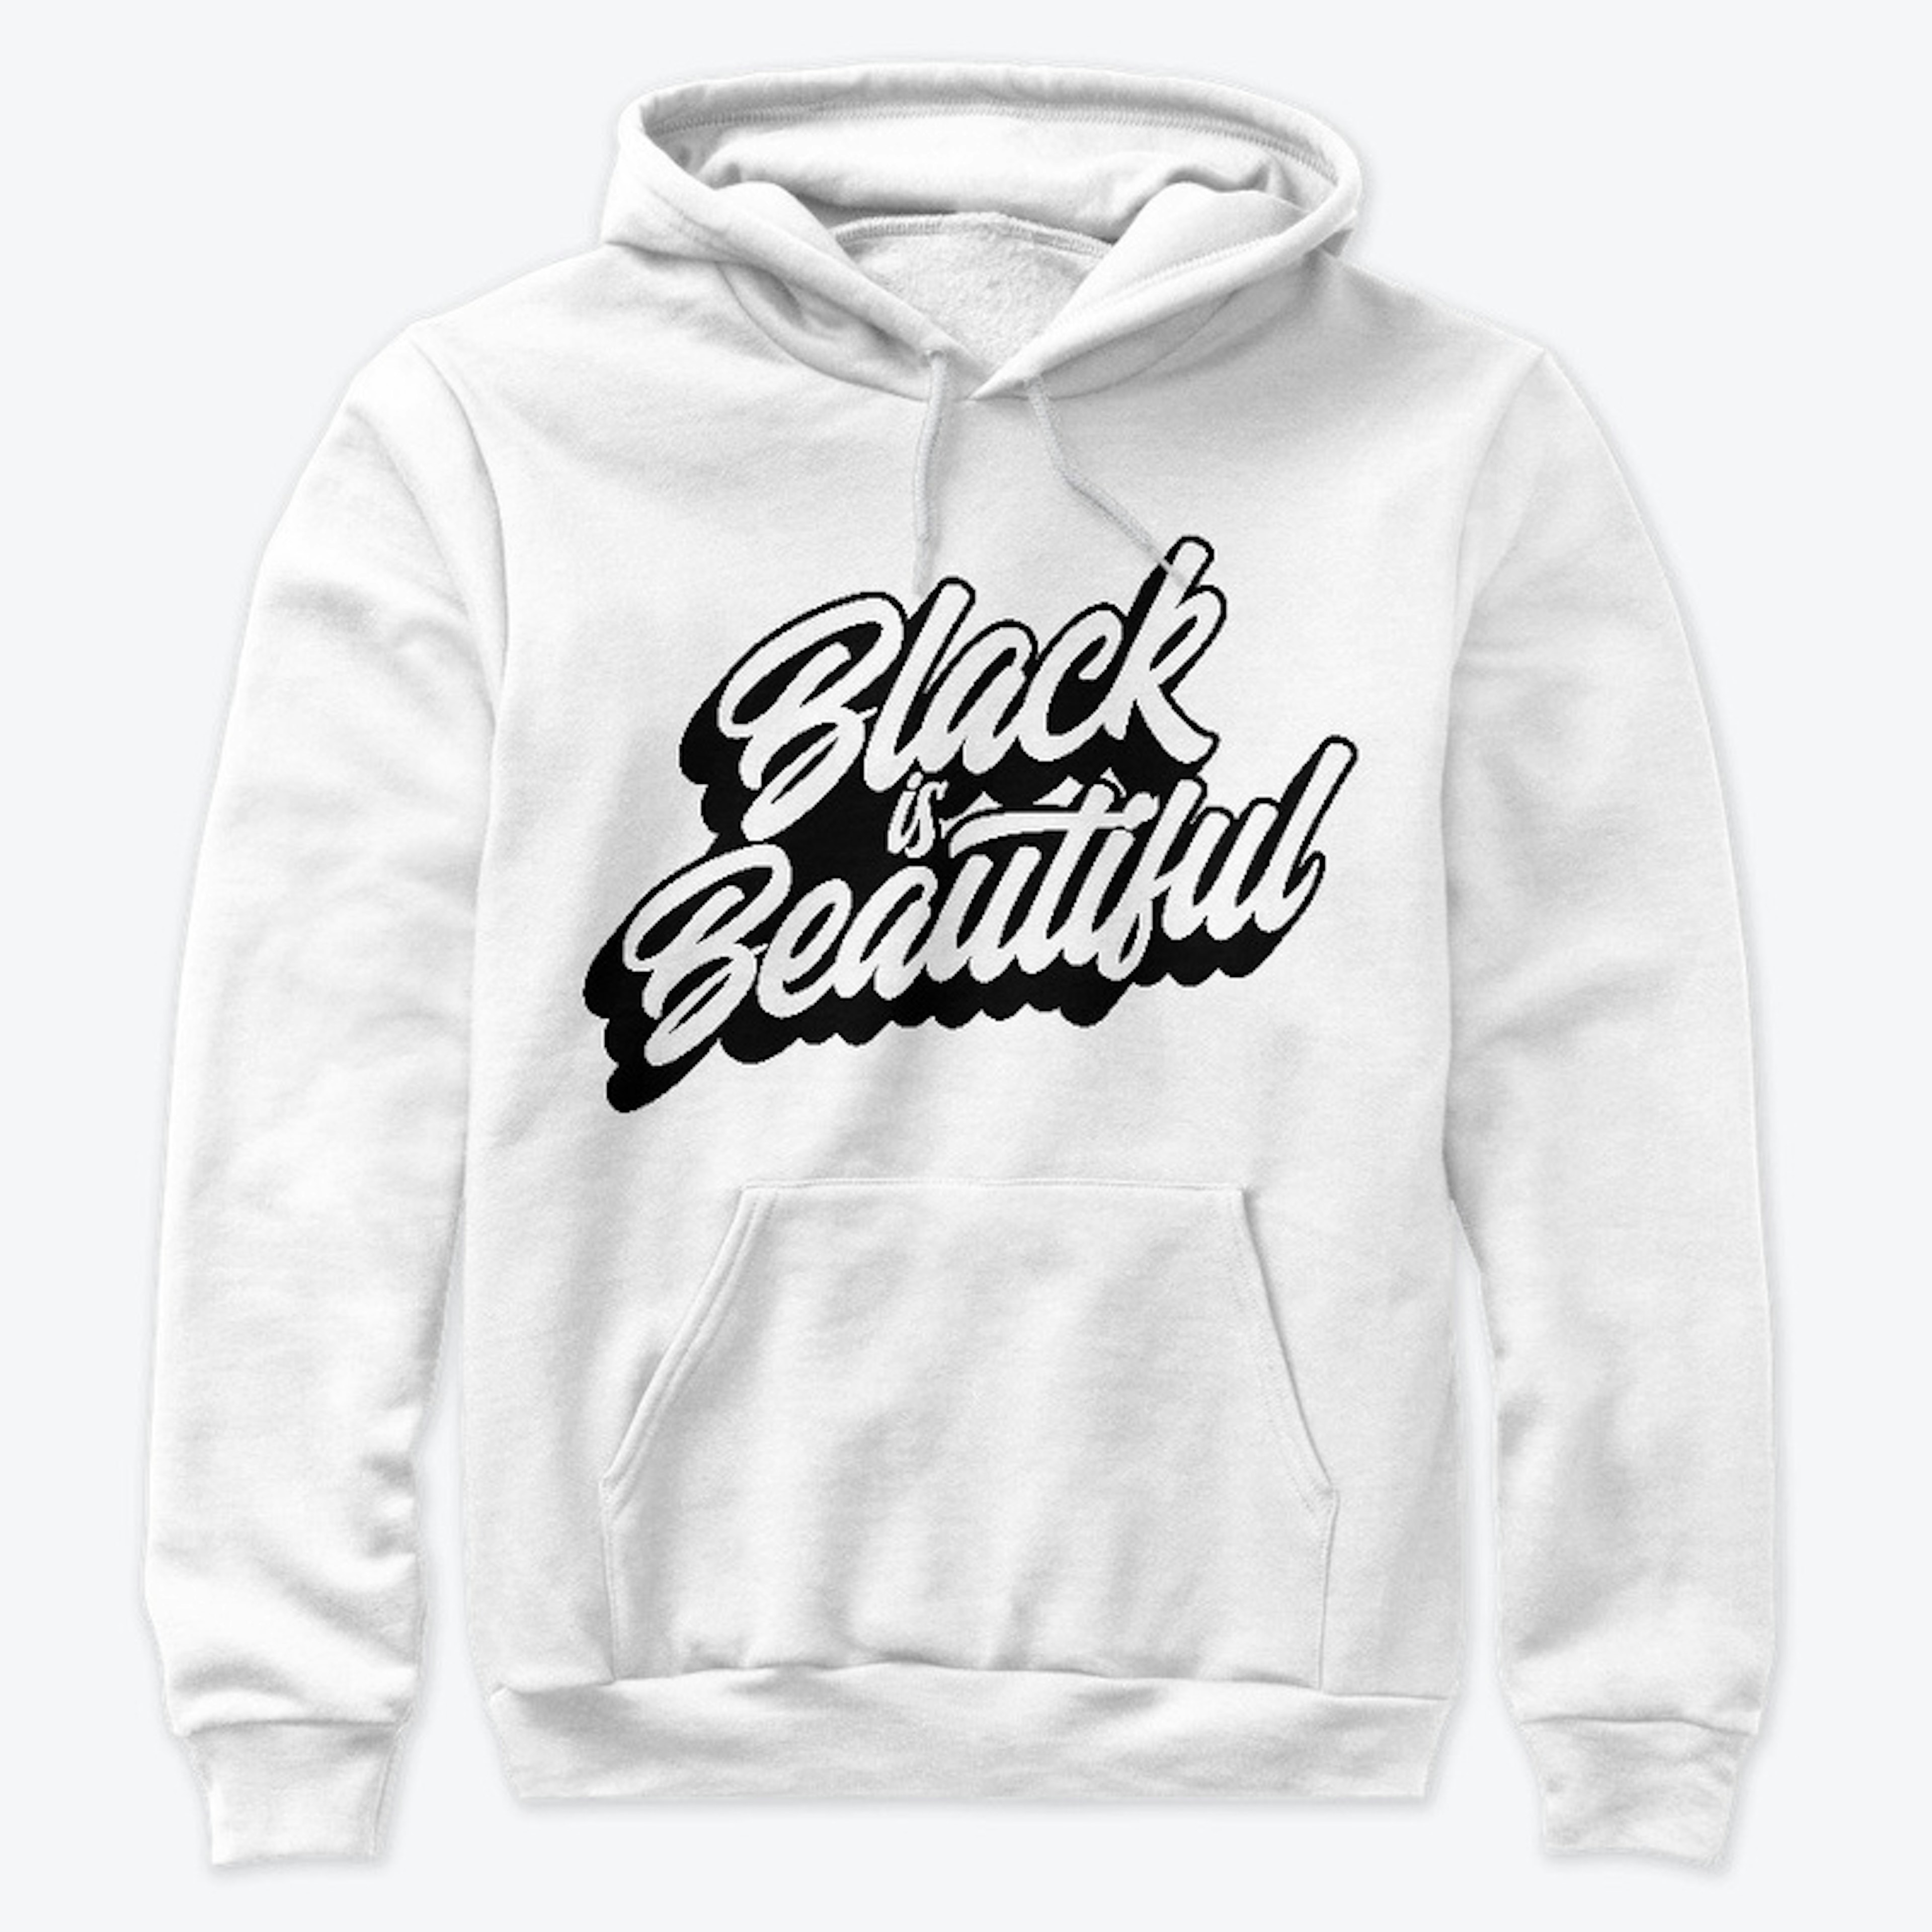 Black Is Beautiful Tees, Totes, and More